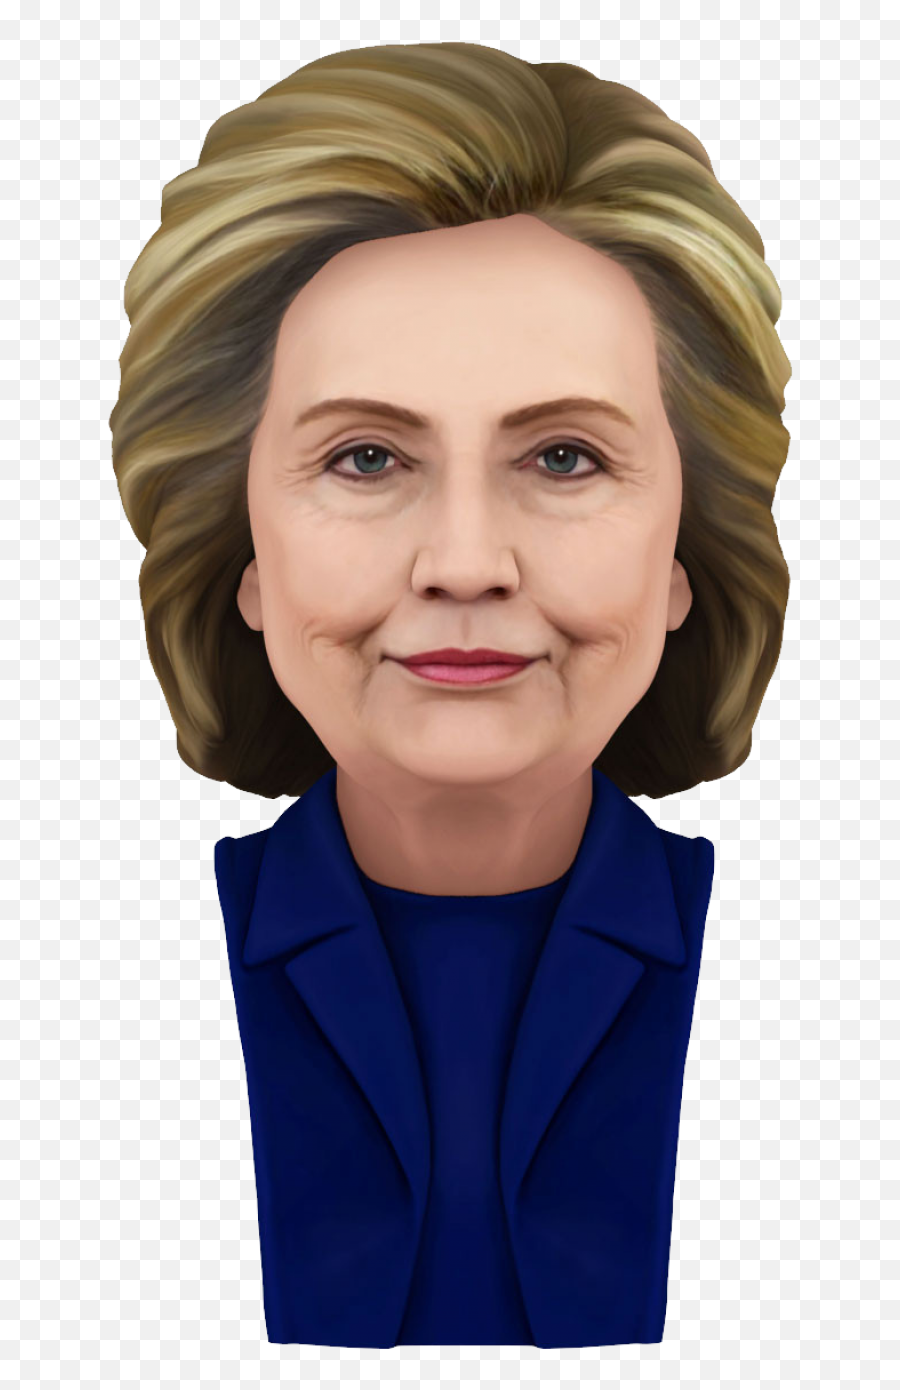 Hillary Clinton Png Image - Hillary Crying Transparent Background,Hillary Clinton Transparent Background